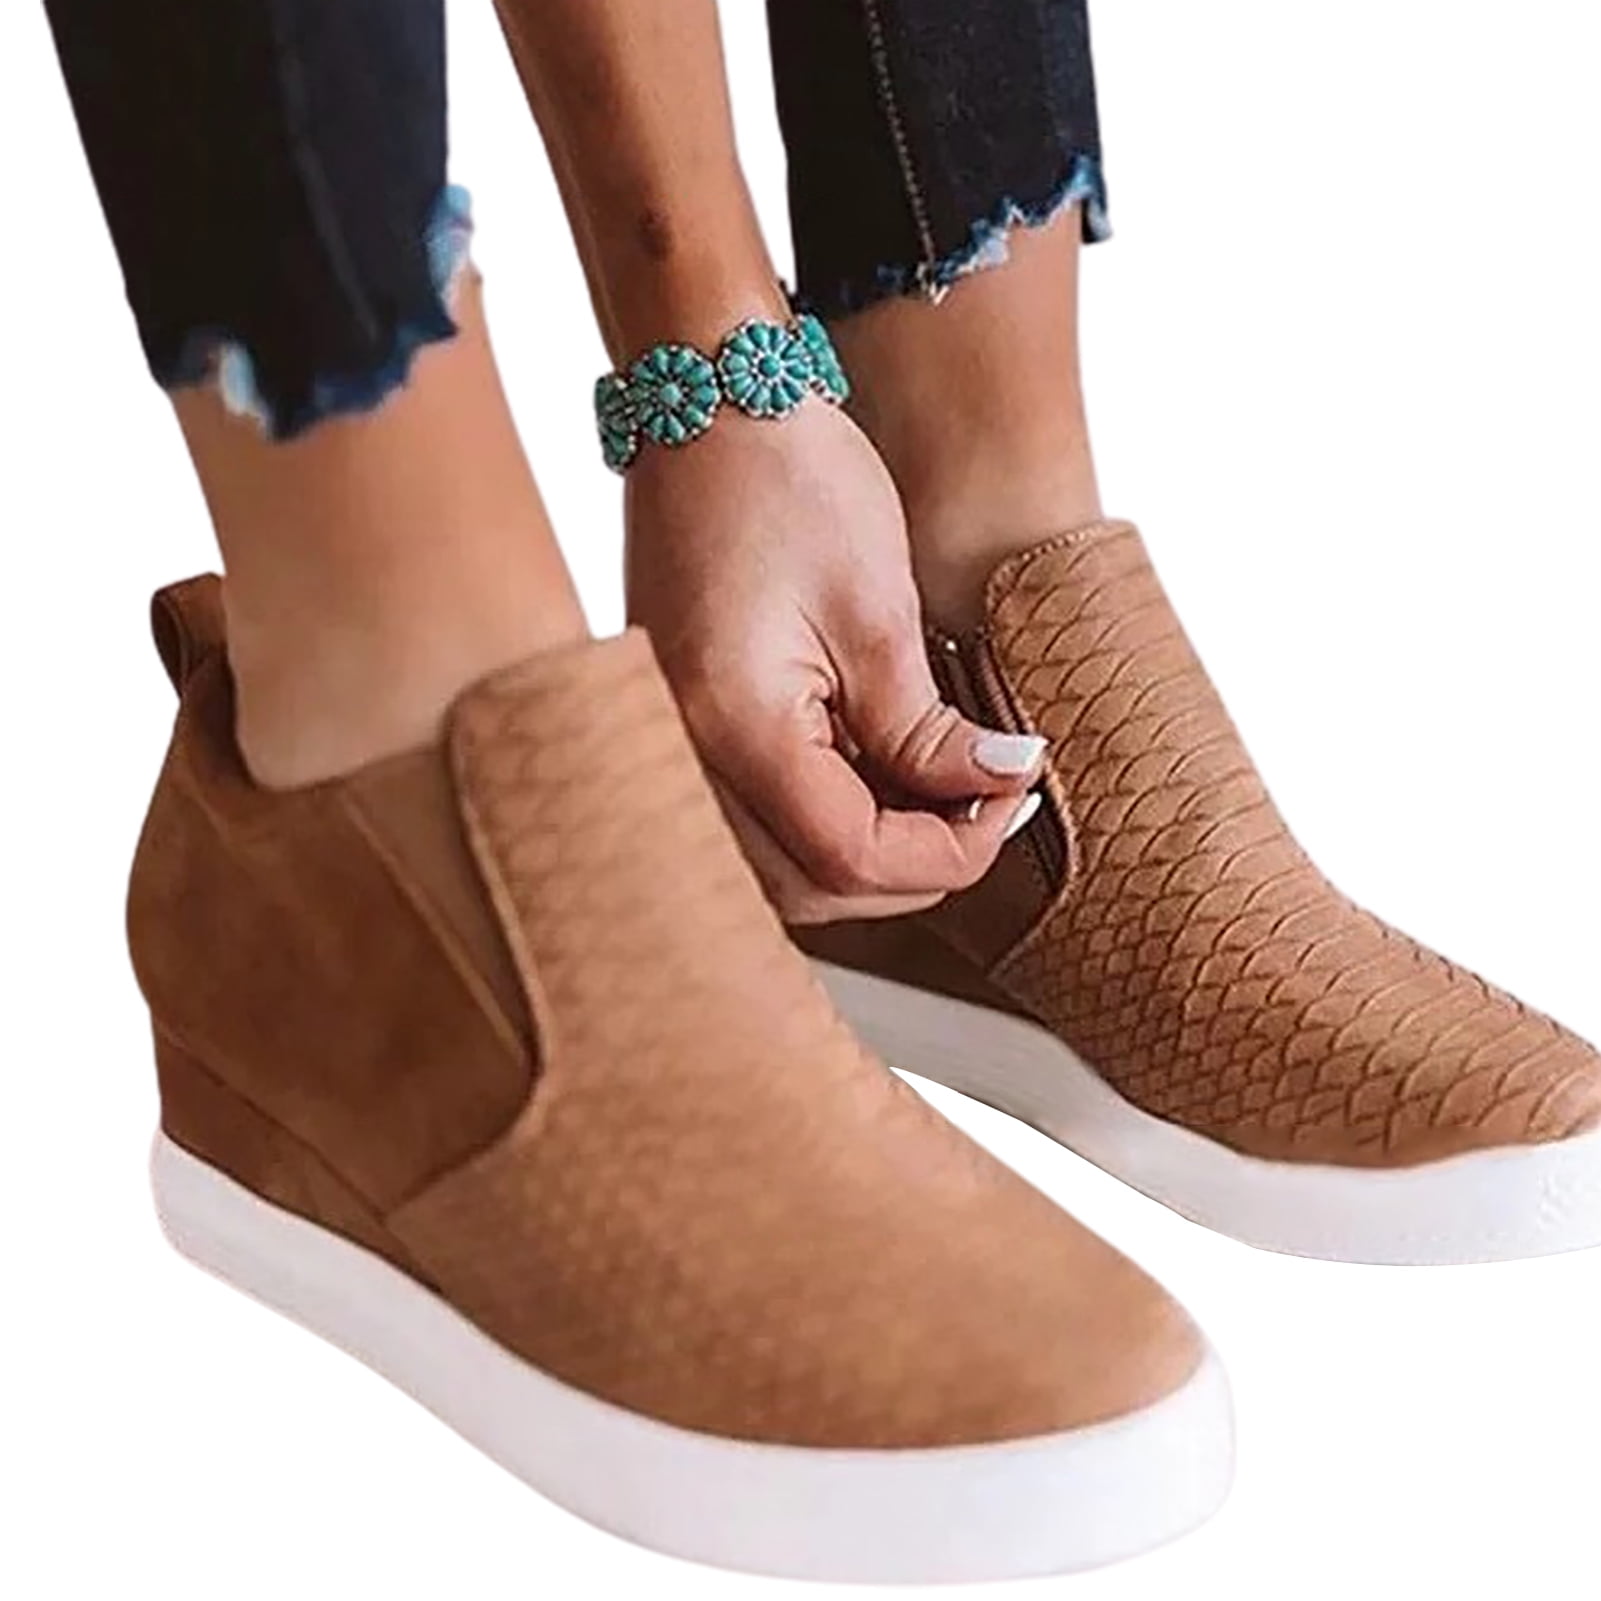 Womens Wedge Sneakers High Top Fashion Heels Booties Ankle Boots Zipper Shoes 